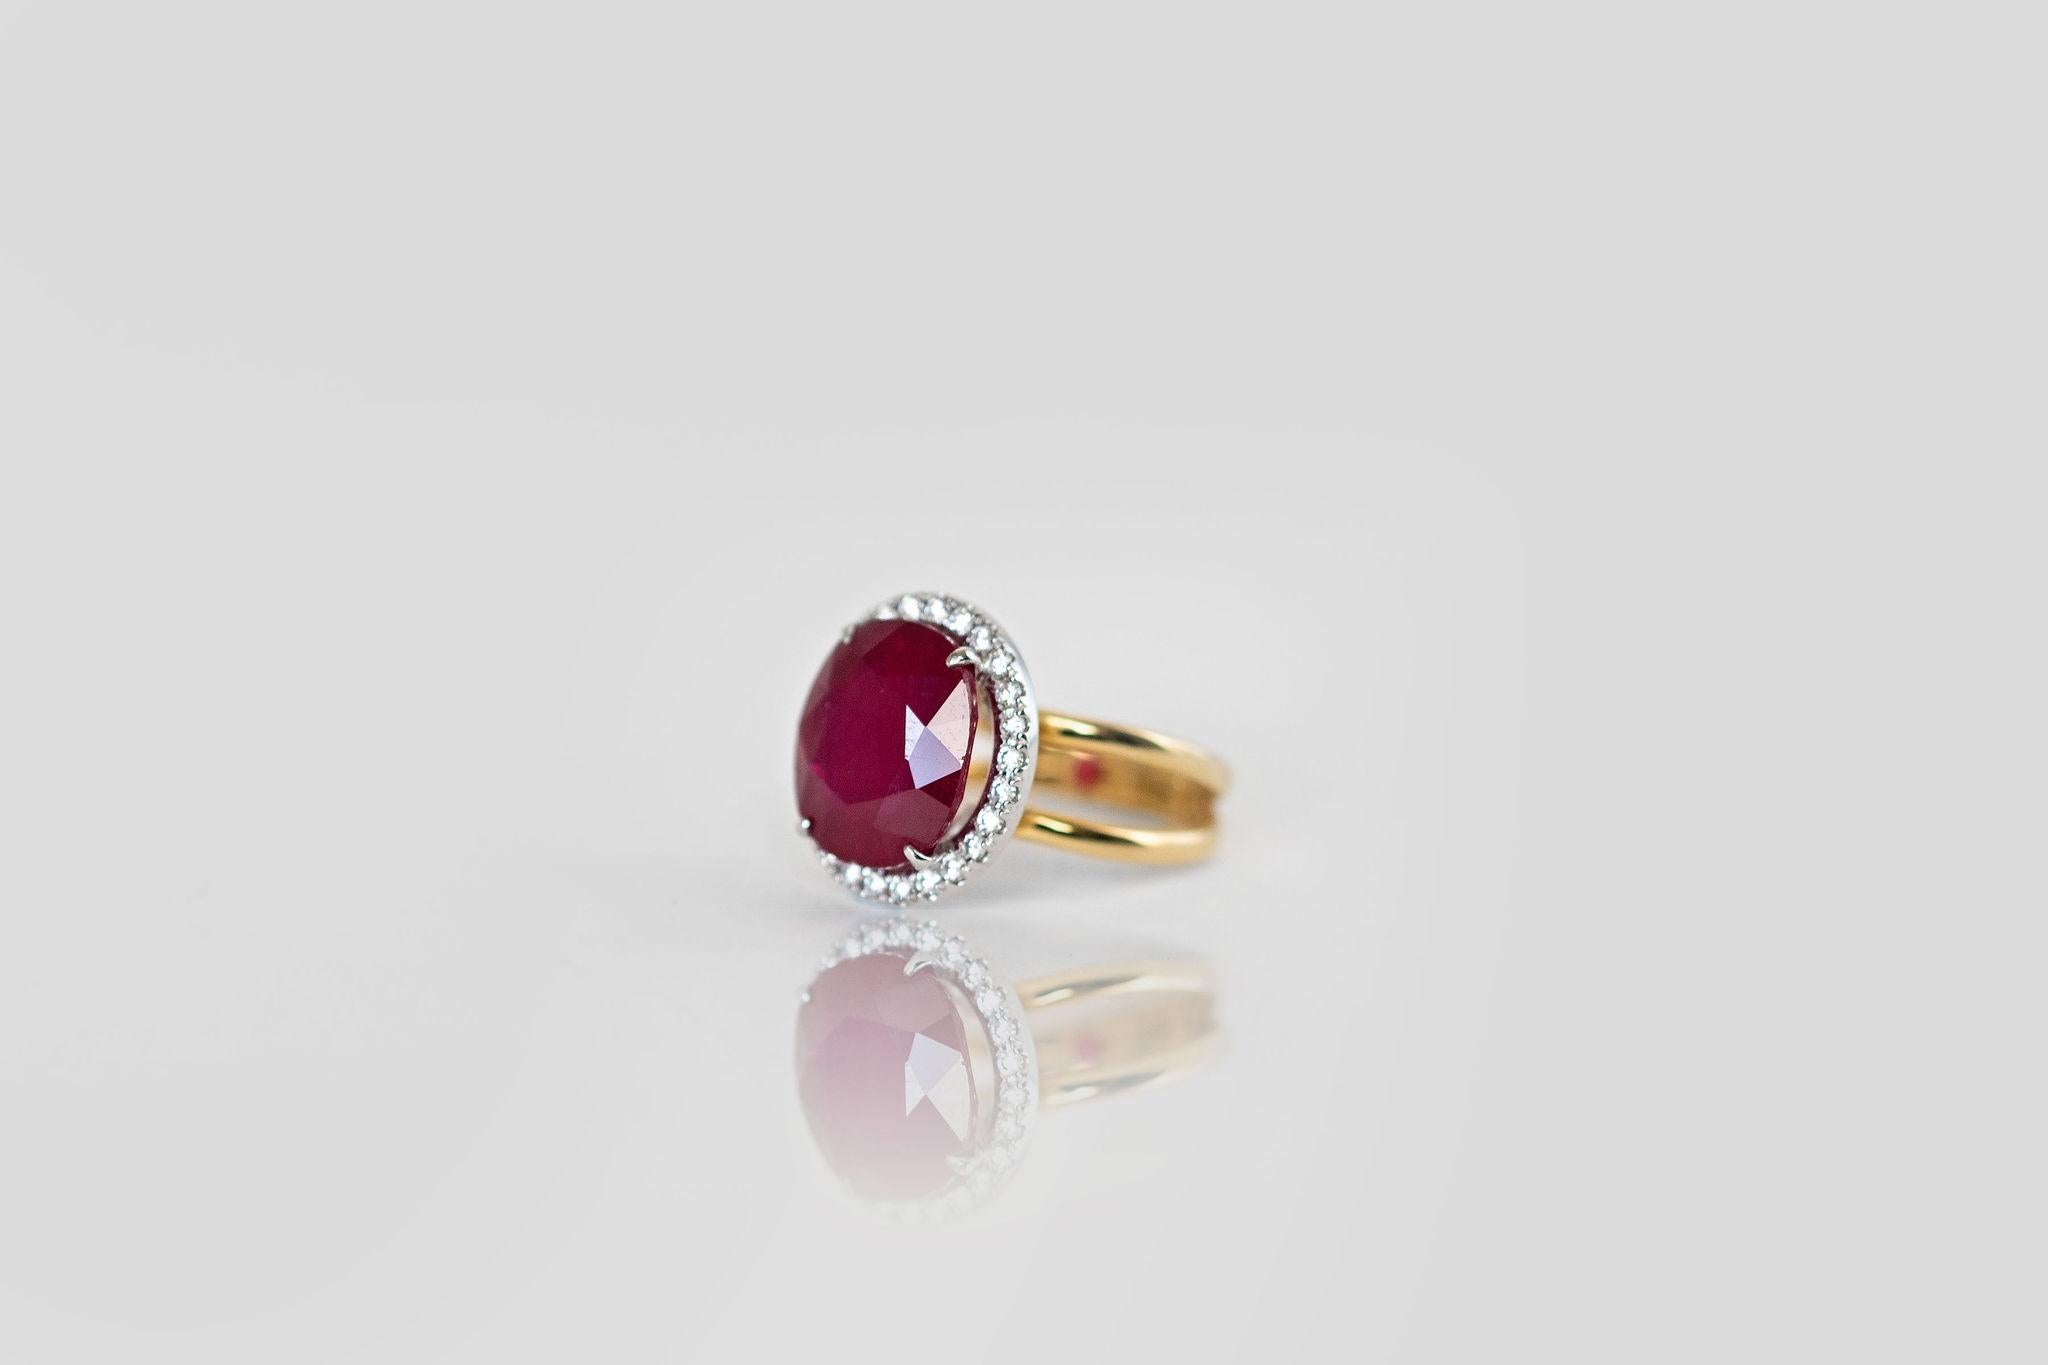 Certified 9 Carat Red Ruby and Diamond Ring, 14k Yellow Gold 5